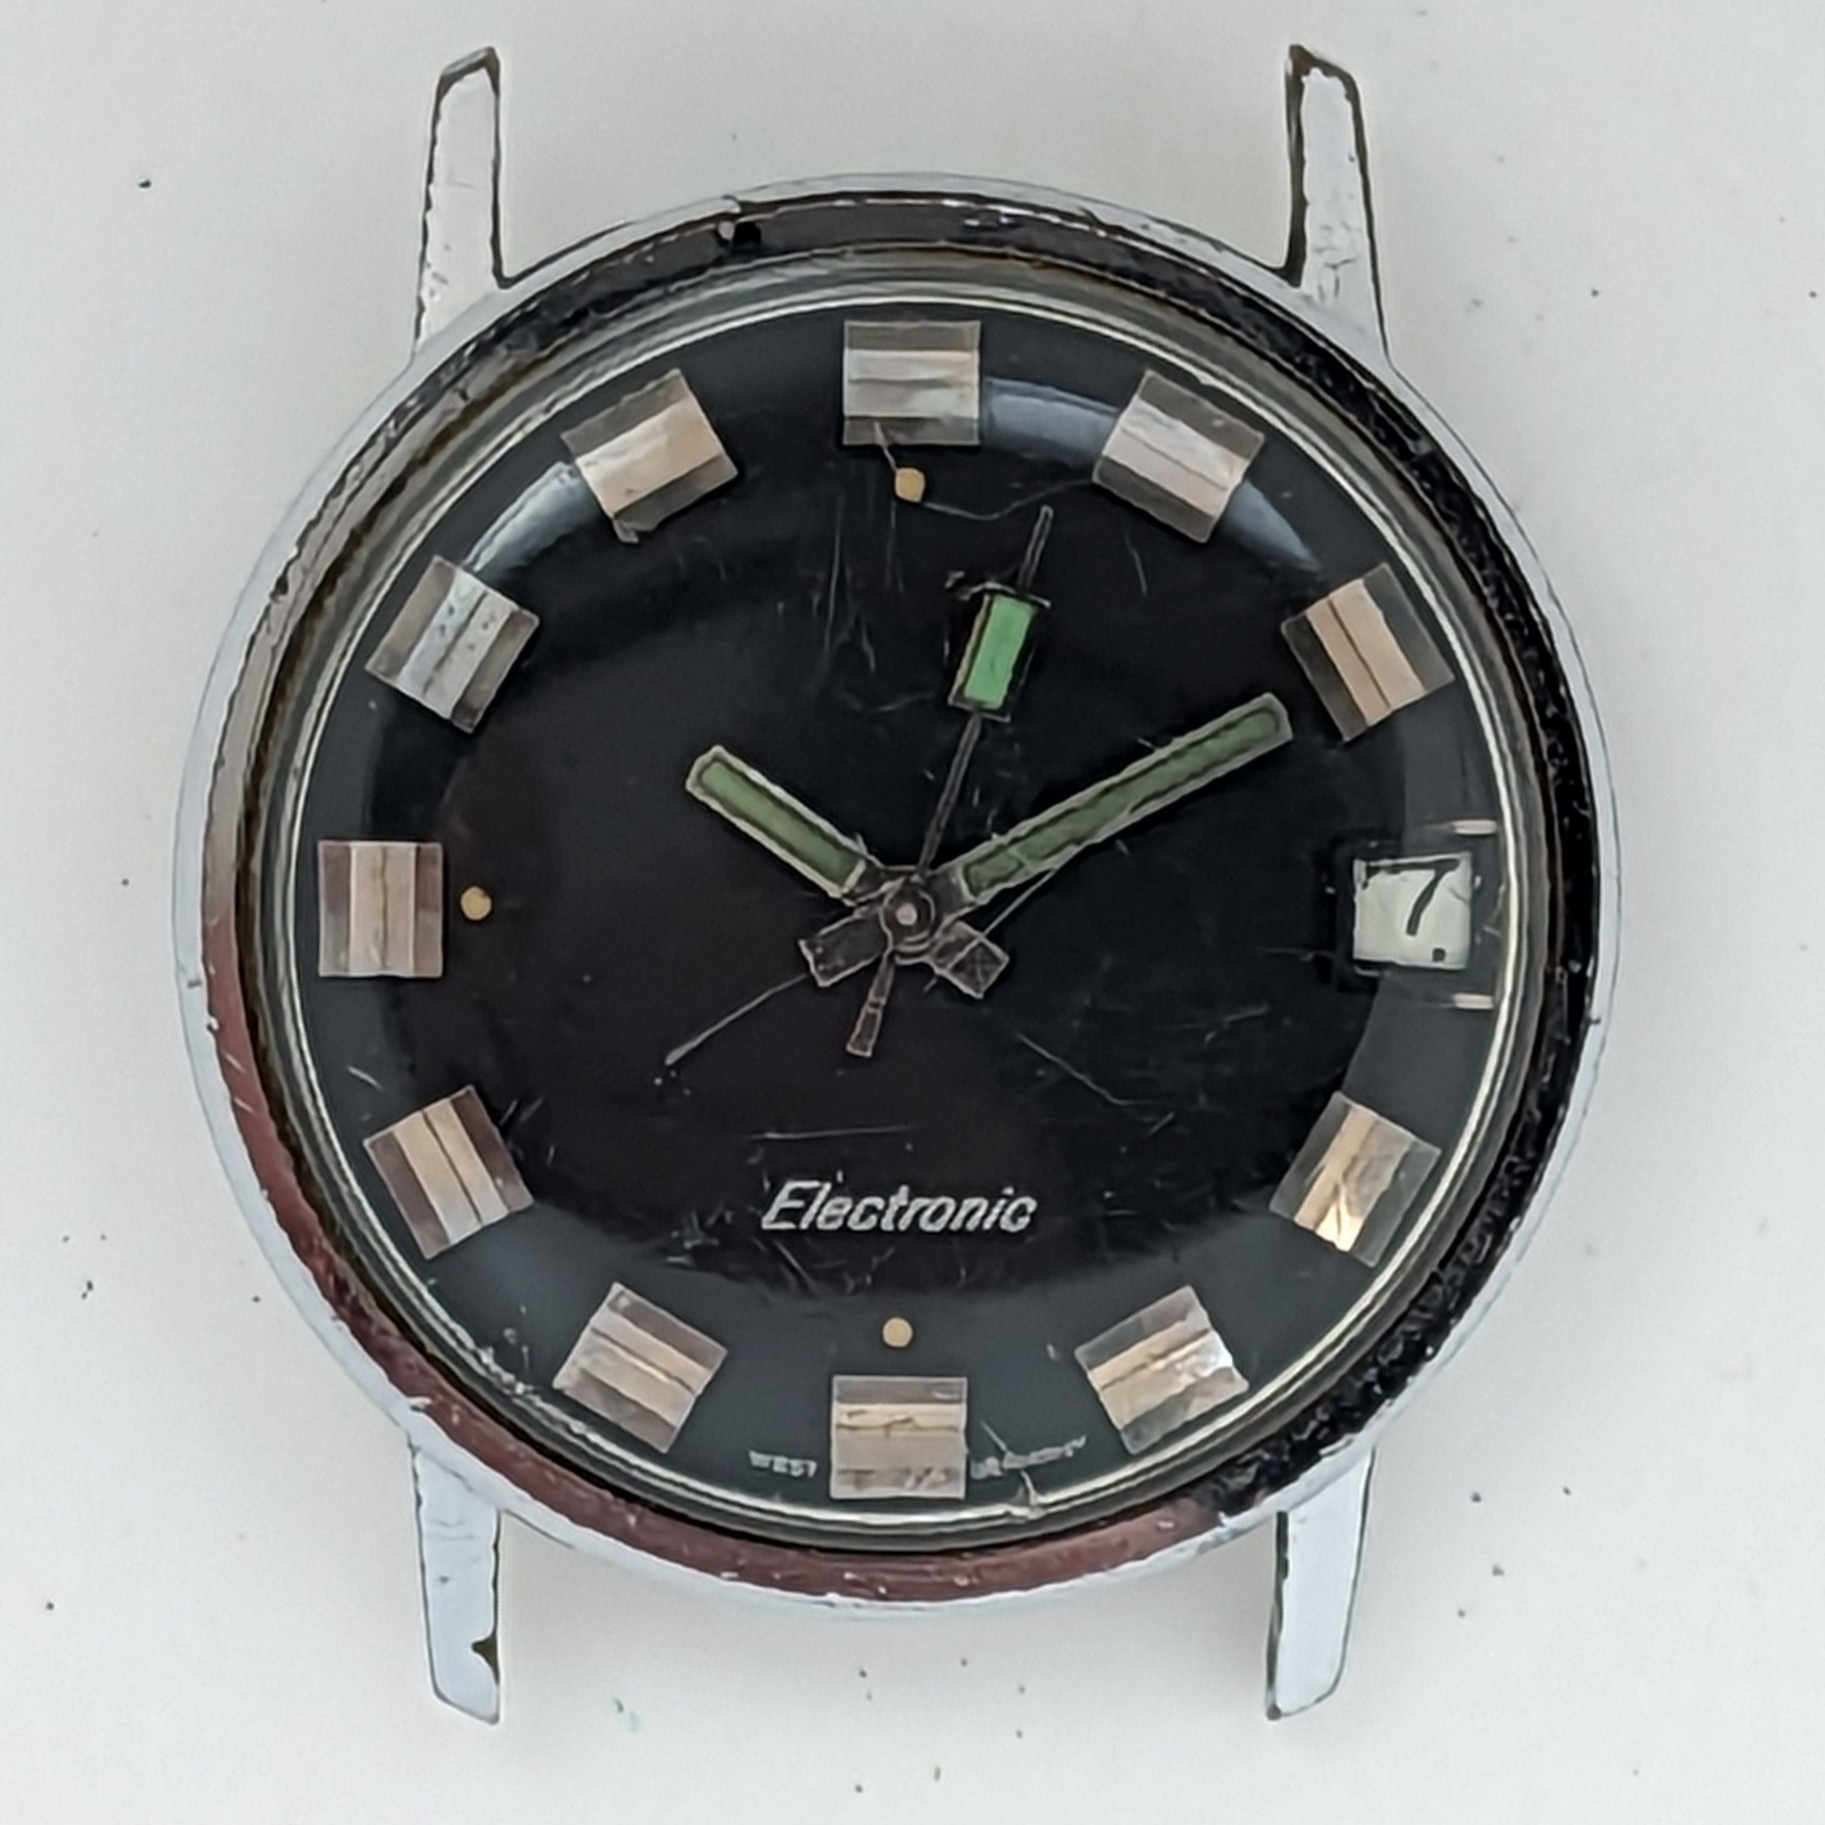 Timex Electronic 1971 – 1972 Ref. 96570 8771 / 8772